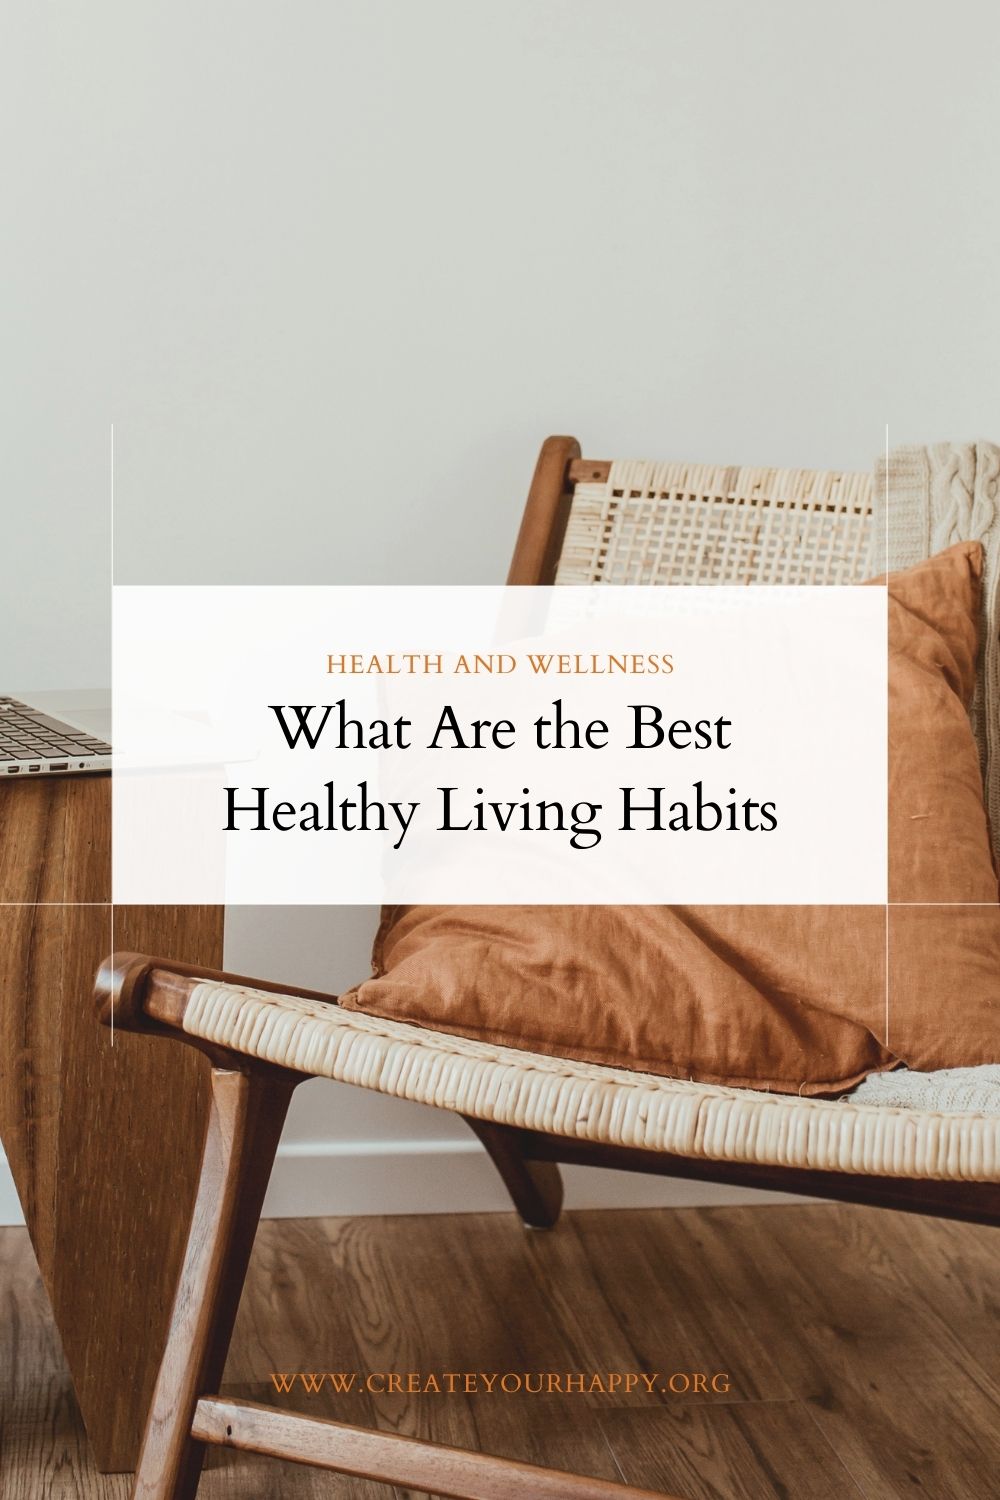 What Are the Best Healthy Living Habits